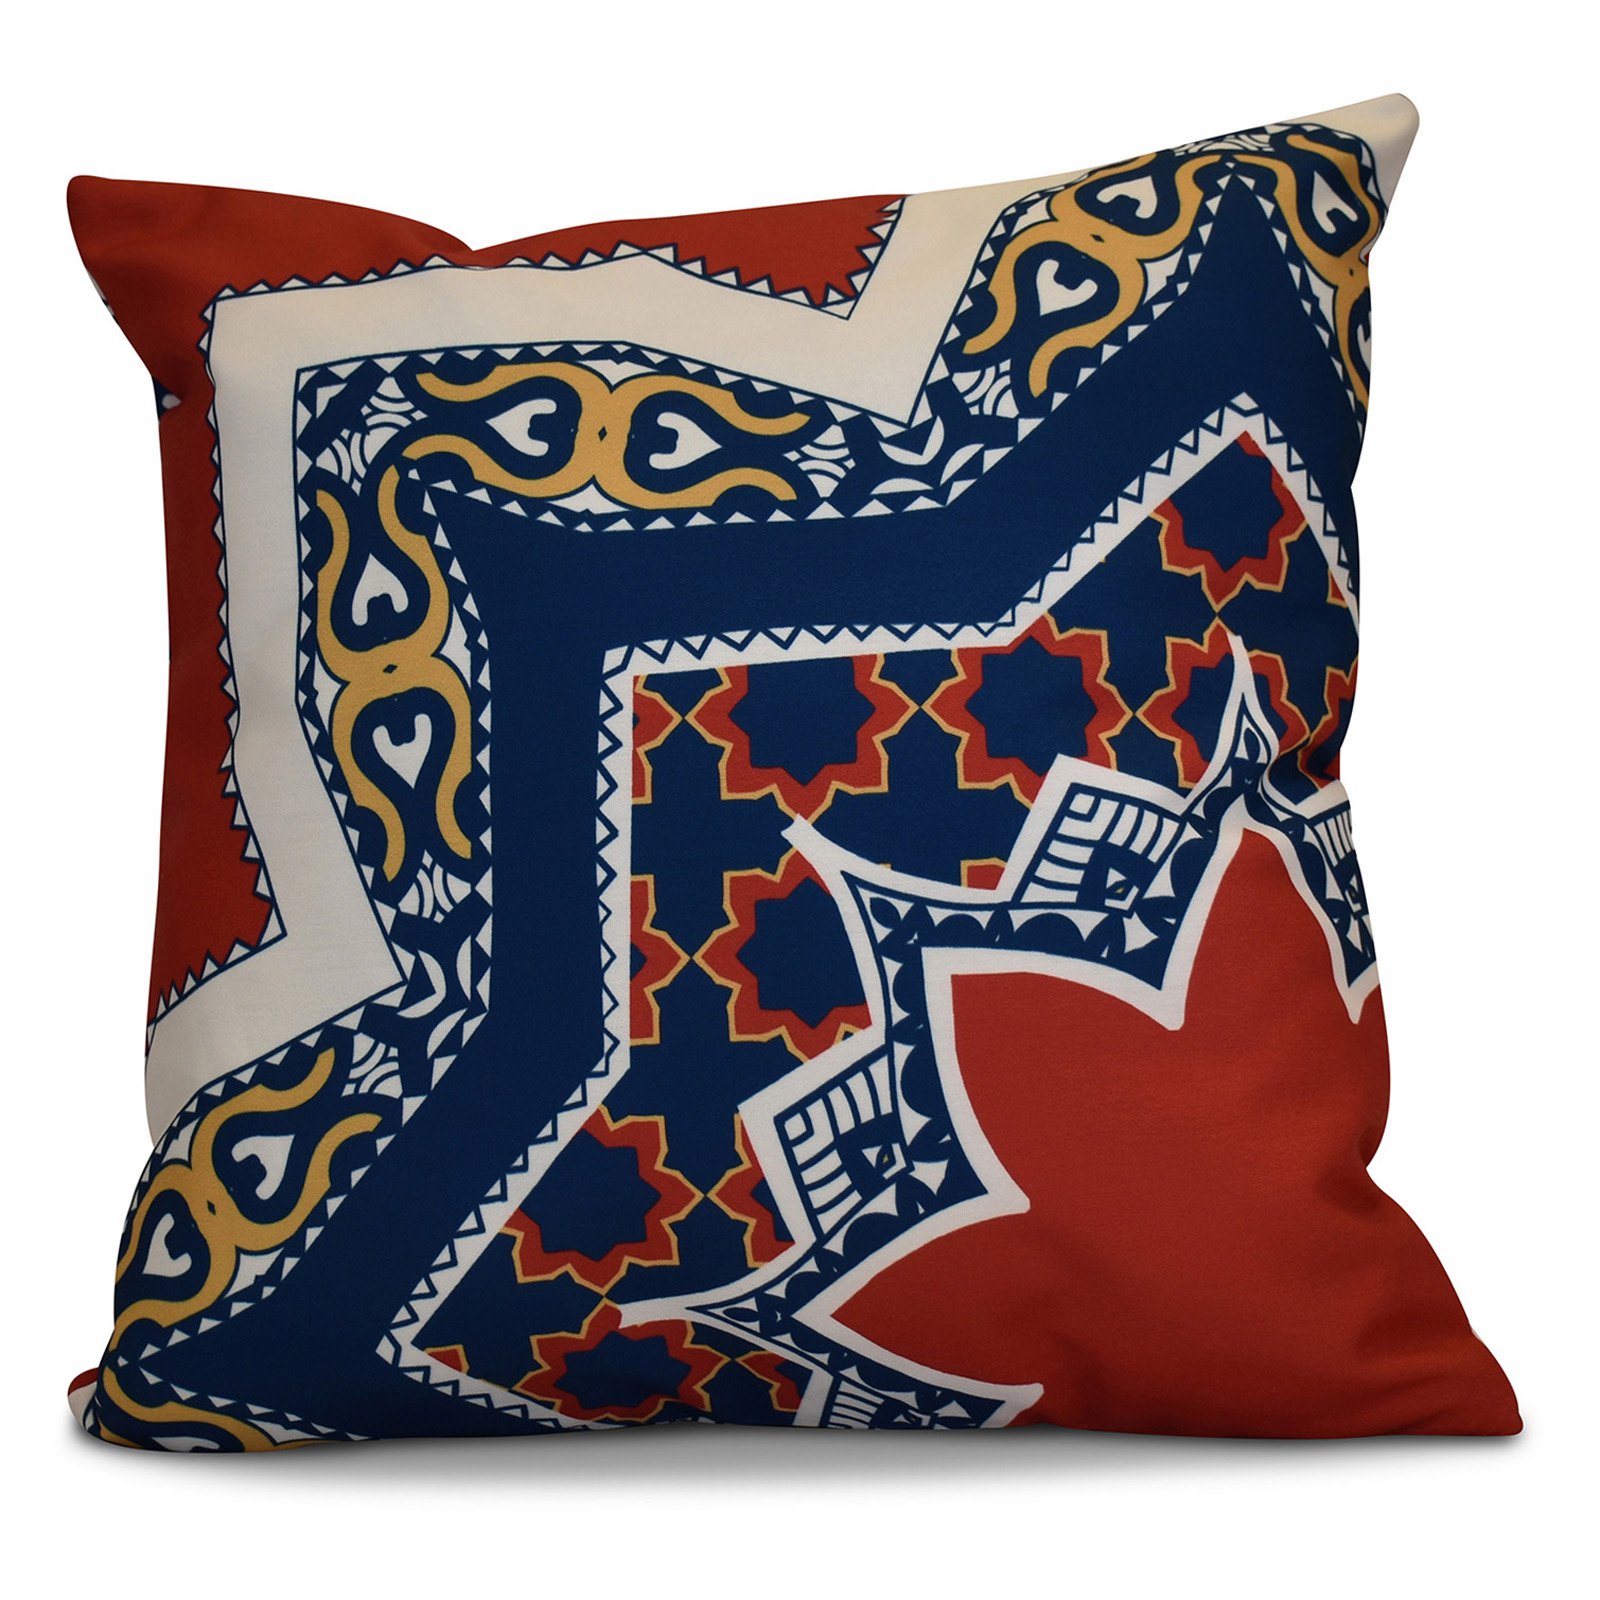 E by Design HH Revival Rising Star Print Outdoor Pillow - image 1 of 6